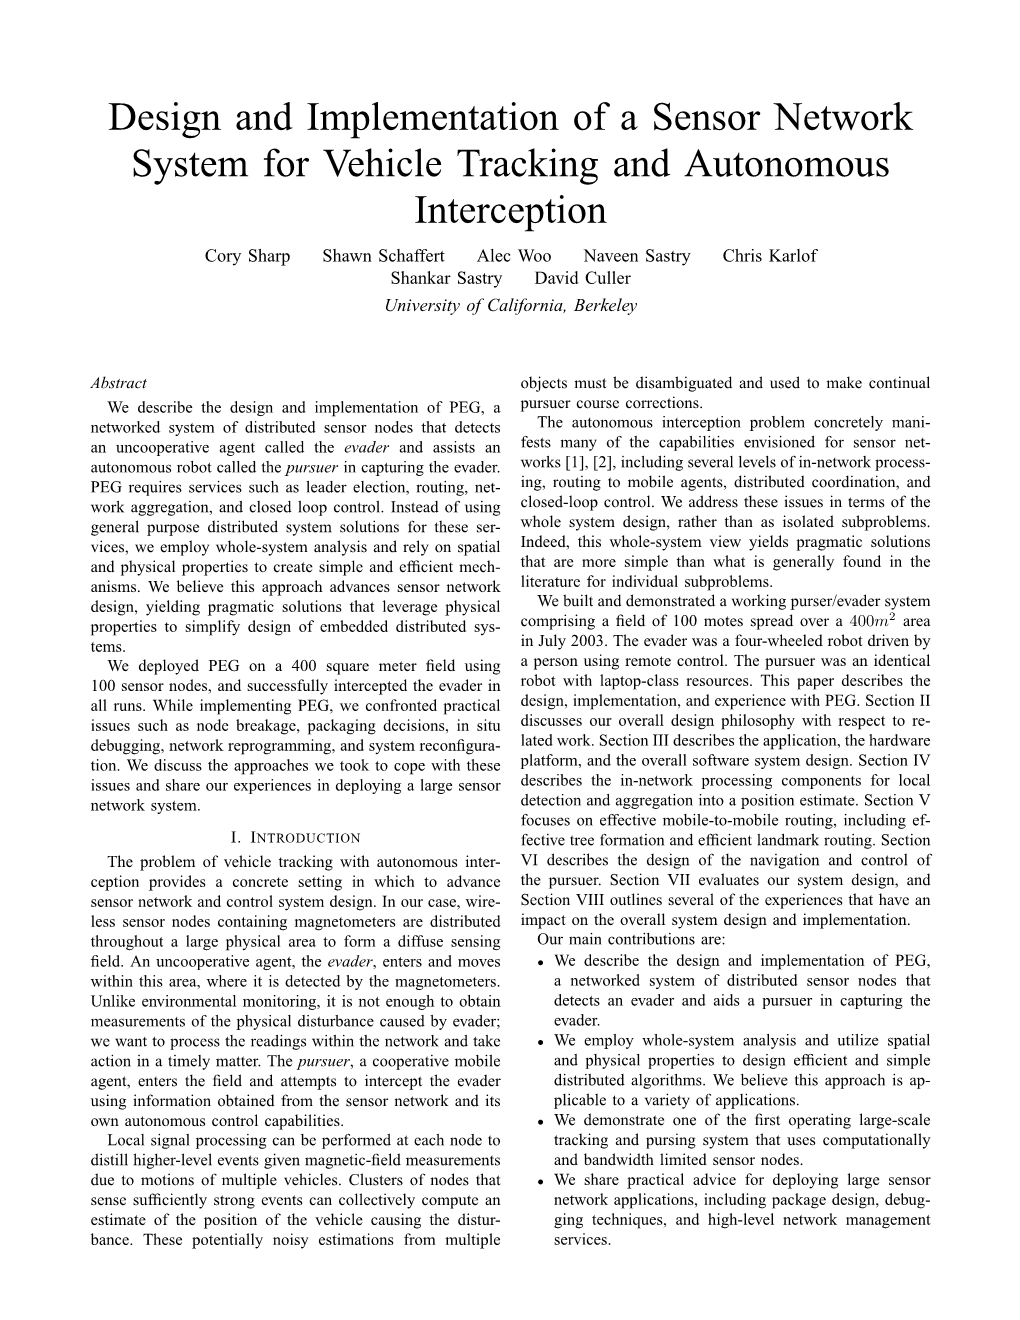 Design and Implementation of a Sensor Network System for Vehicle